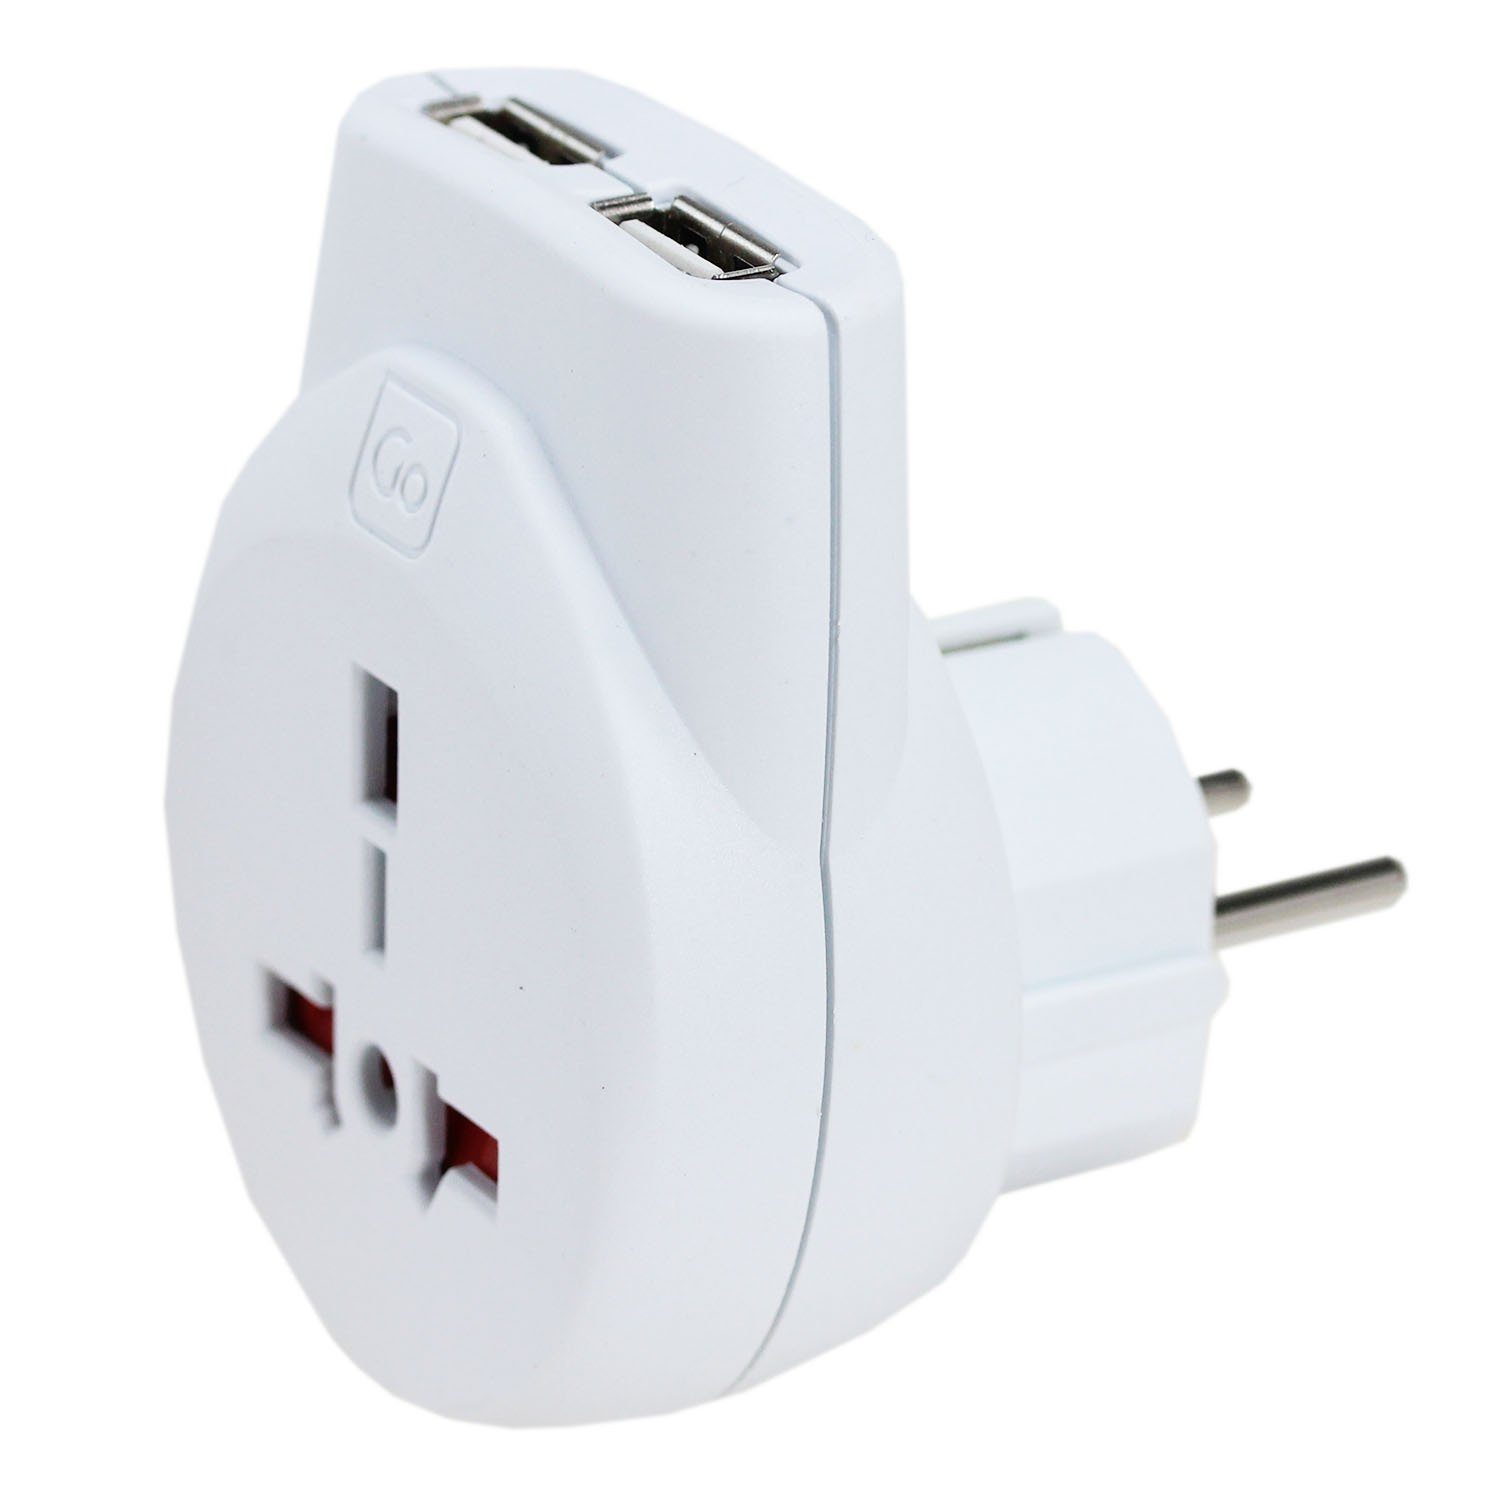 go travel adapter not working